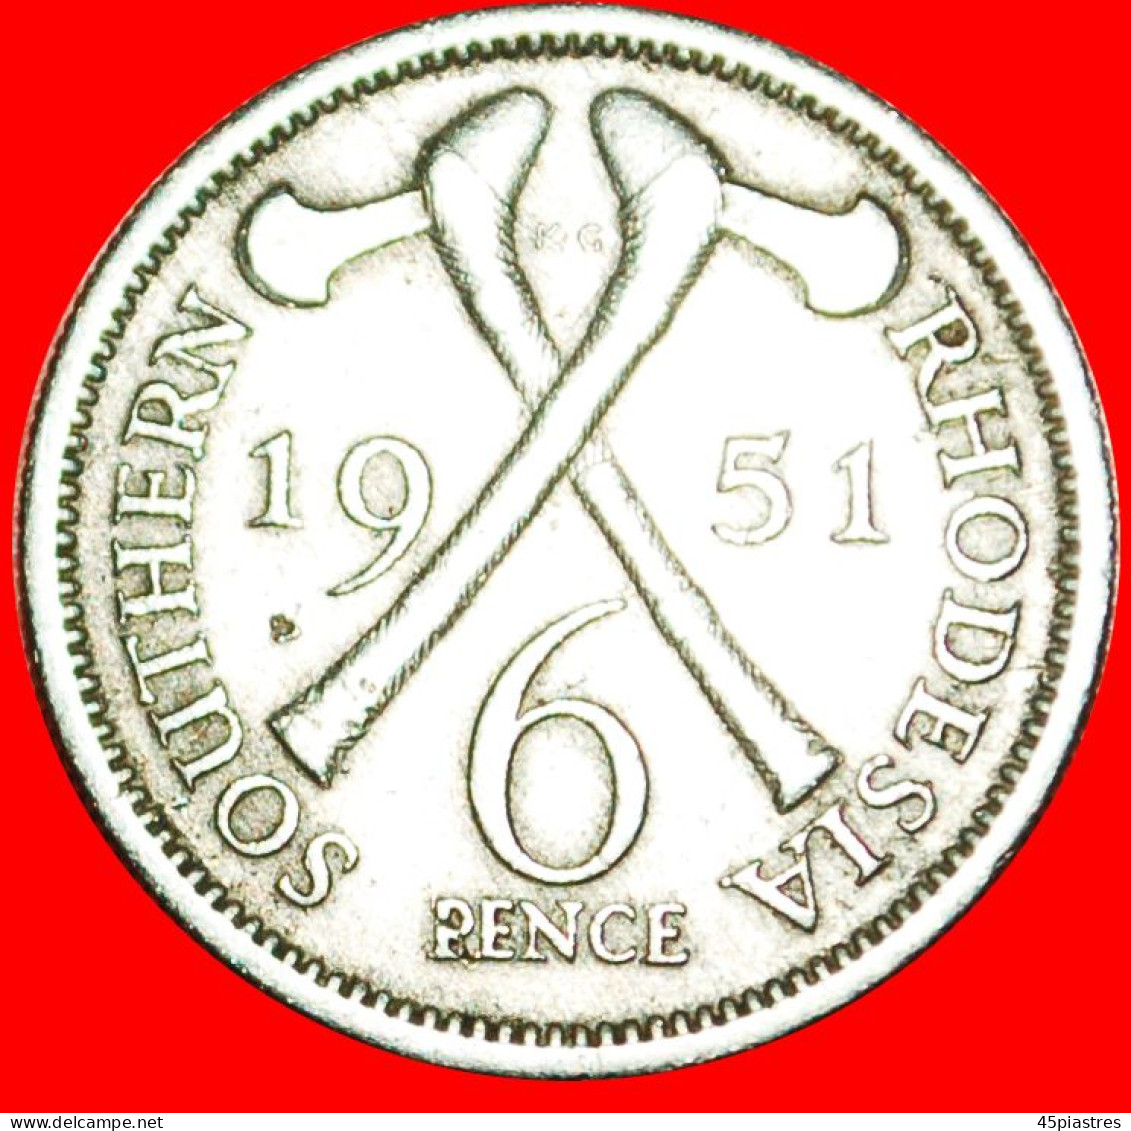 &#9733;2 AXES: SOUTHERN RHODESIA &#9733; 6 PENCE 1951! LOW START&#9733;NO RESERVE! George VI (1937-1952) - Rhodesia